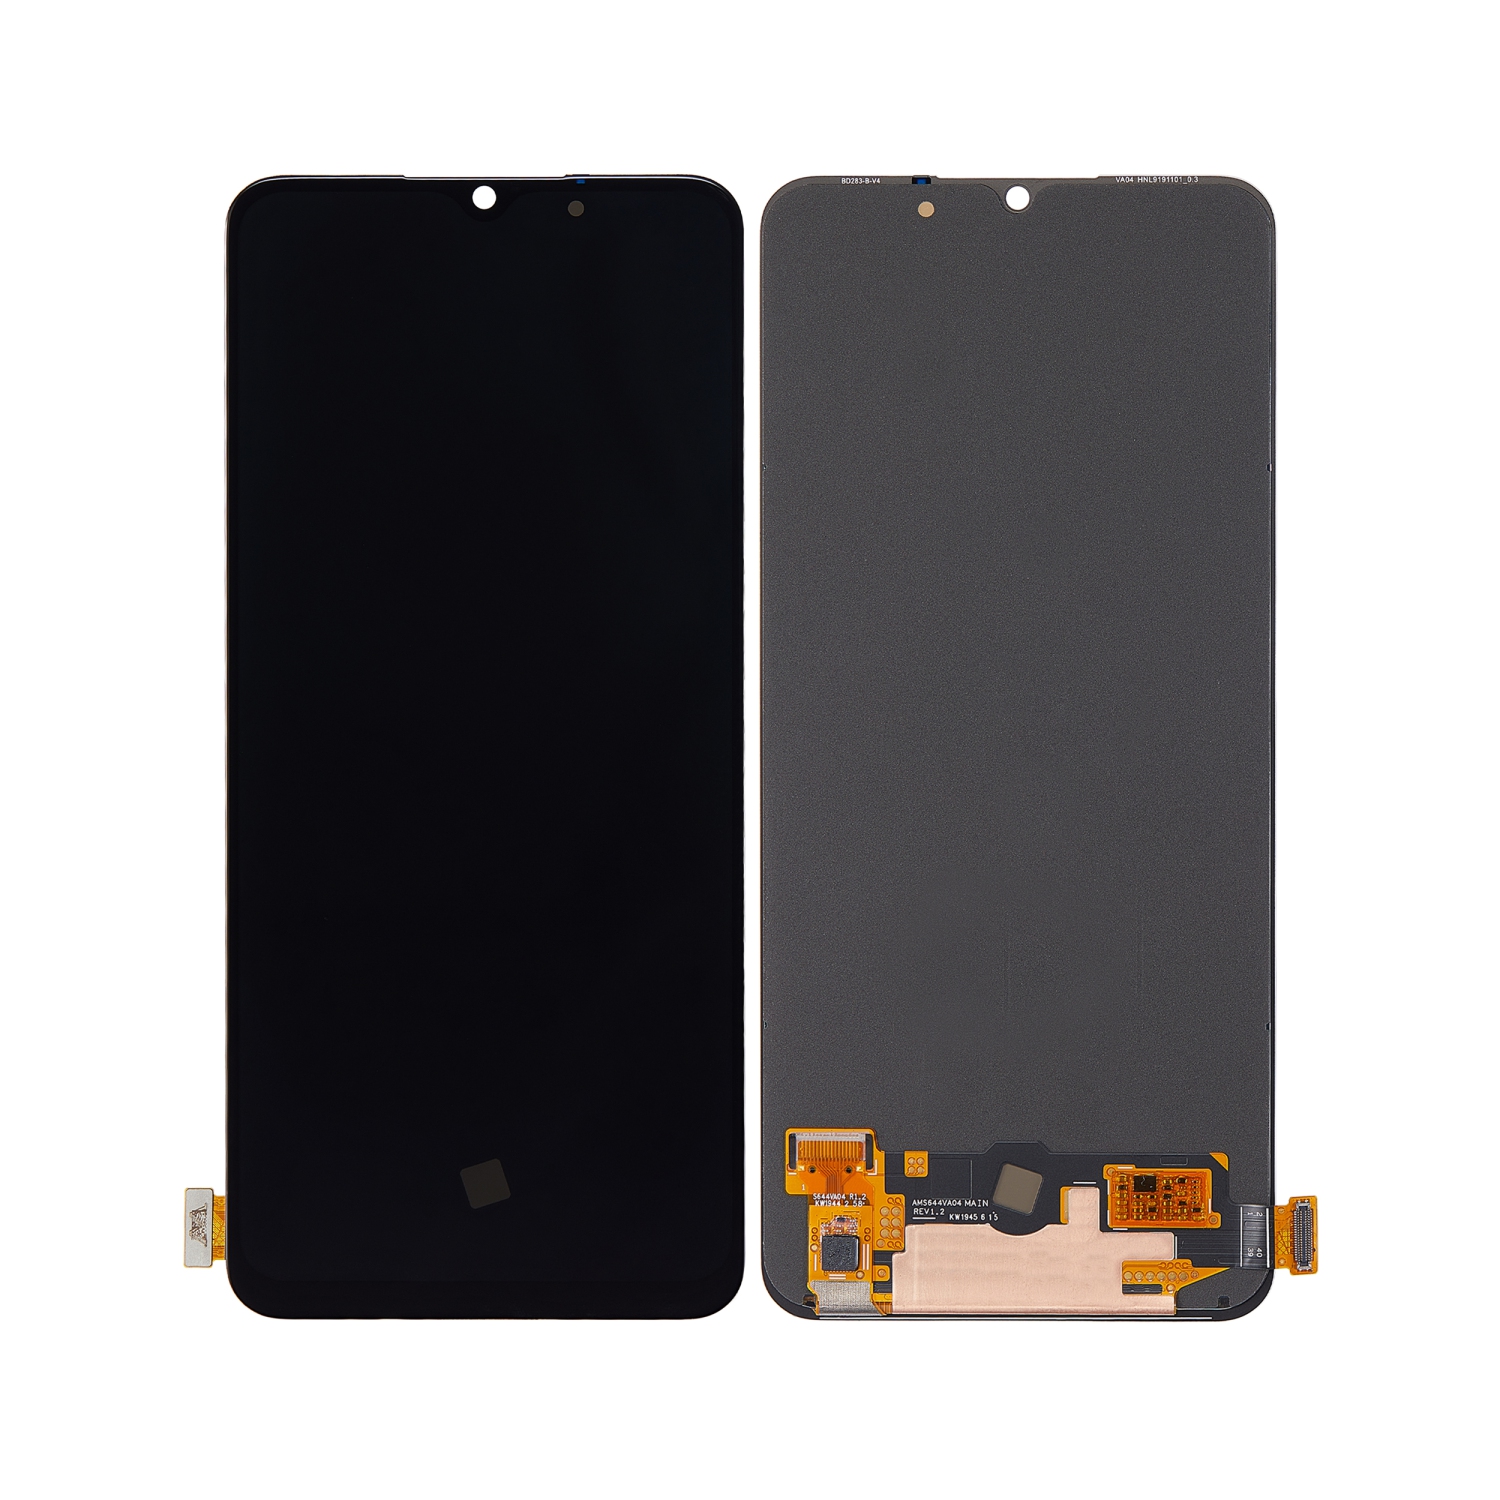 Refurbished (Excellent) - Replacement OLED Assembly Without Frame Compatible For OPPO Reno 3 / A91 / Find X2 Lite / F15 / F17 / A73 4G / K7 5G (All Colors)